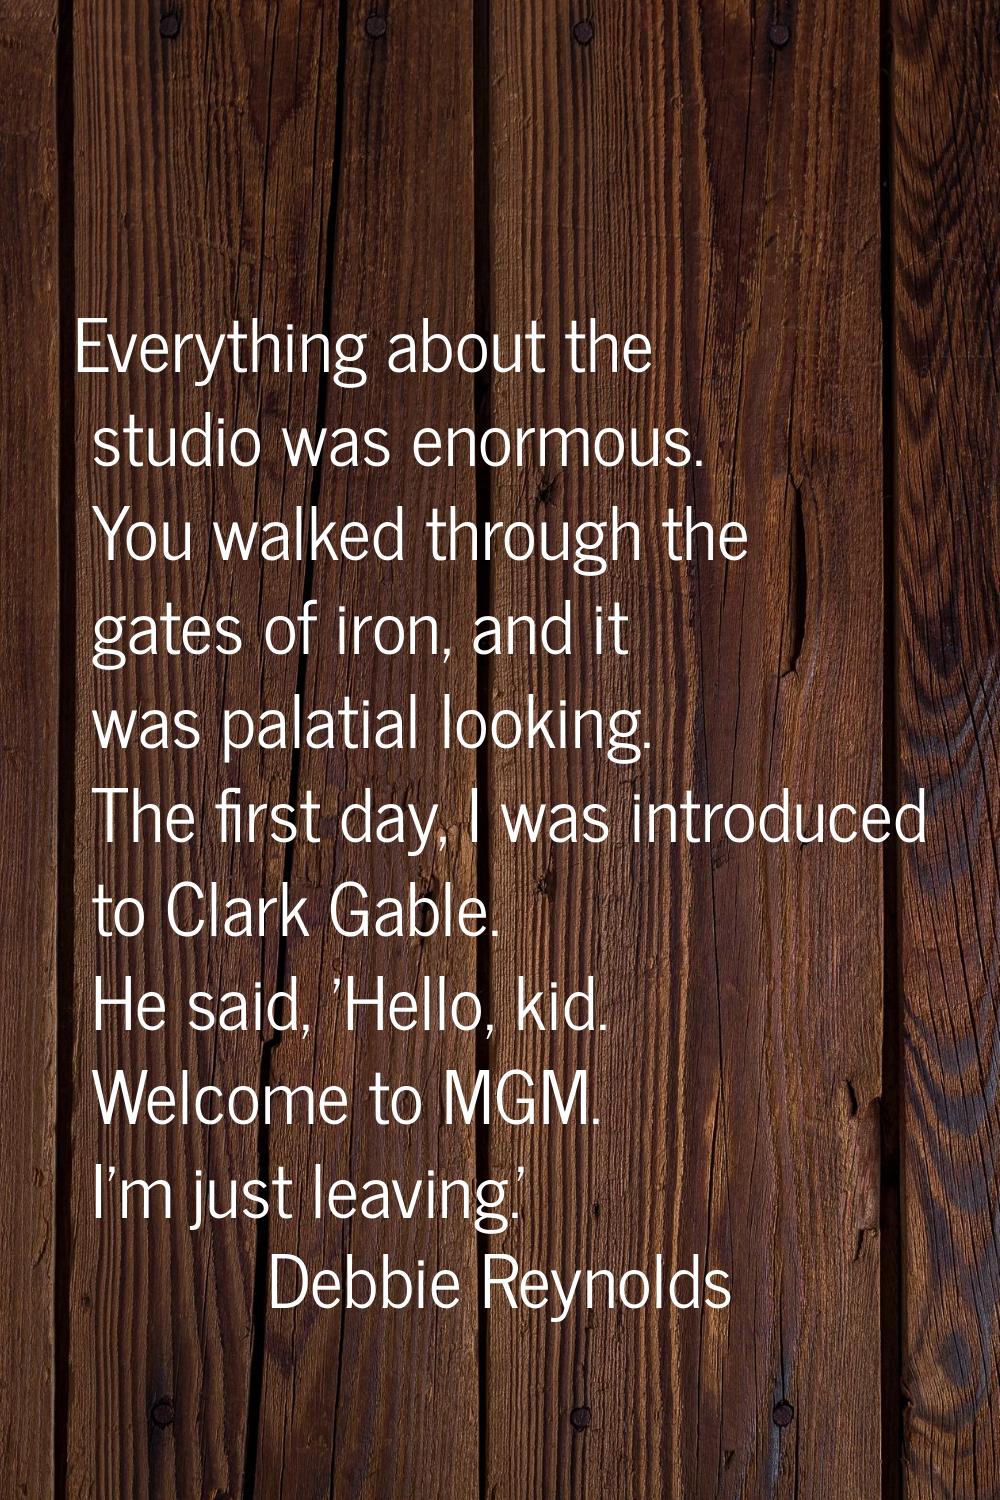 Everything about the studio was enormous. You walked through the gates of iron, and it was palatial